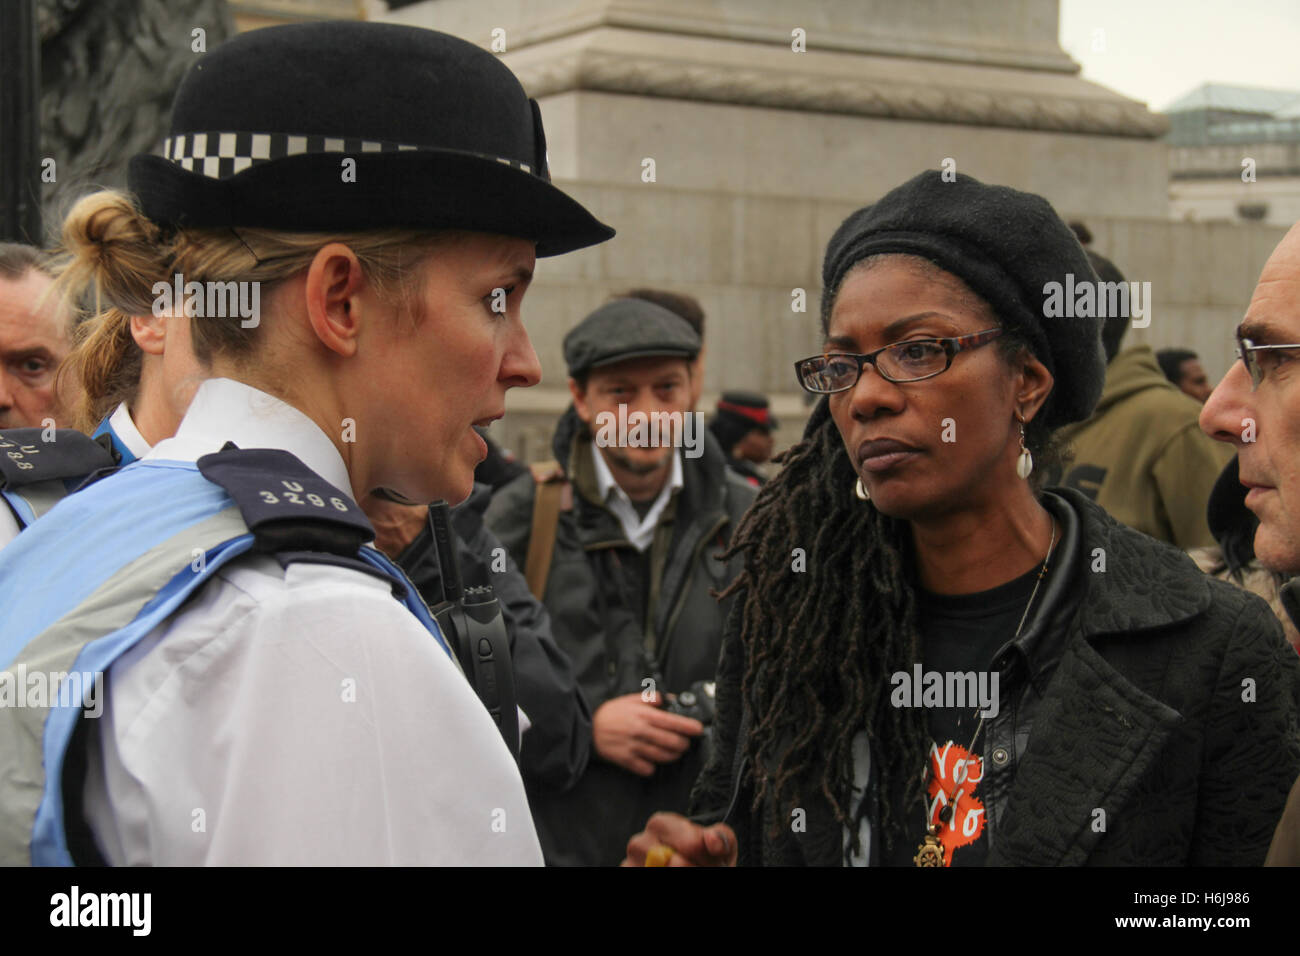 London, UK. 29th October, 2016. A police officer talk to Marcia Rigg ahead of the annual United Families and Friends Campaign (UFFC) remembrance procession at Trafalgar Square on 29 October 2016, the procession was delayed by half an hour . The silent precession is in memeory for those who have died while in custody of the state. The UFFC have been marching for the past 18 years from Trafalgar Square to Downing Street. Todate, there have been 1577 death in police custody since 1990 with no convictions. Credit:  David Mbiyu/Alamy Live News Stock Photo